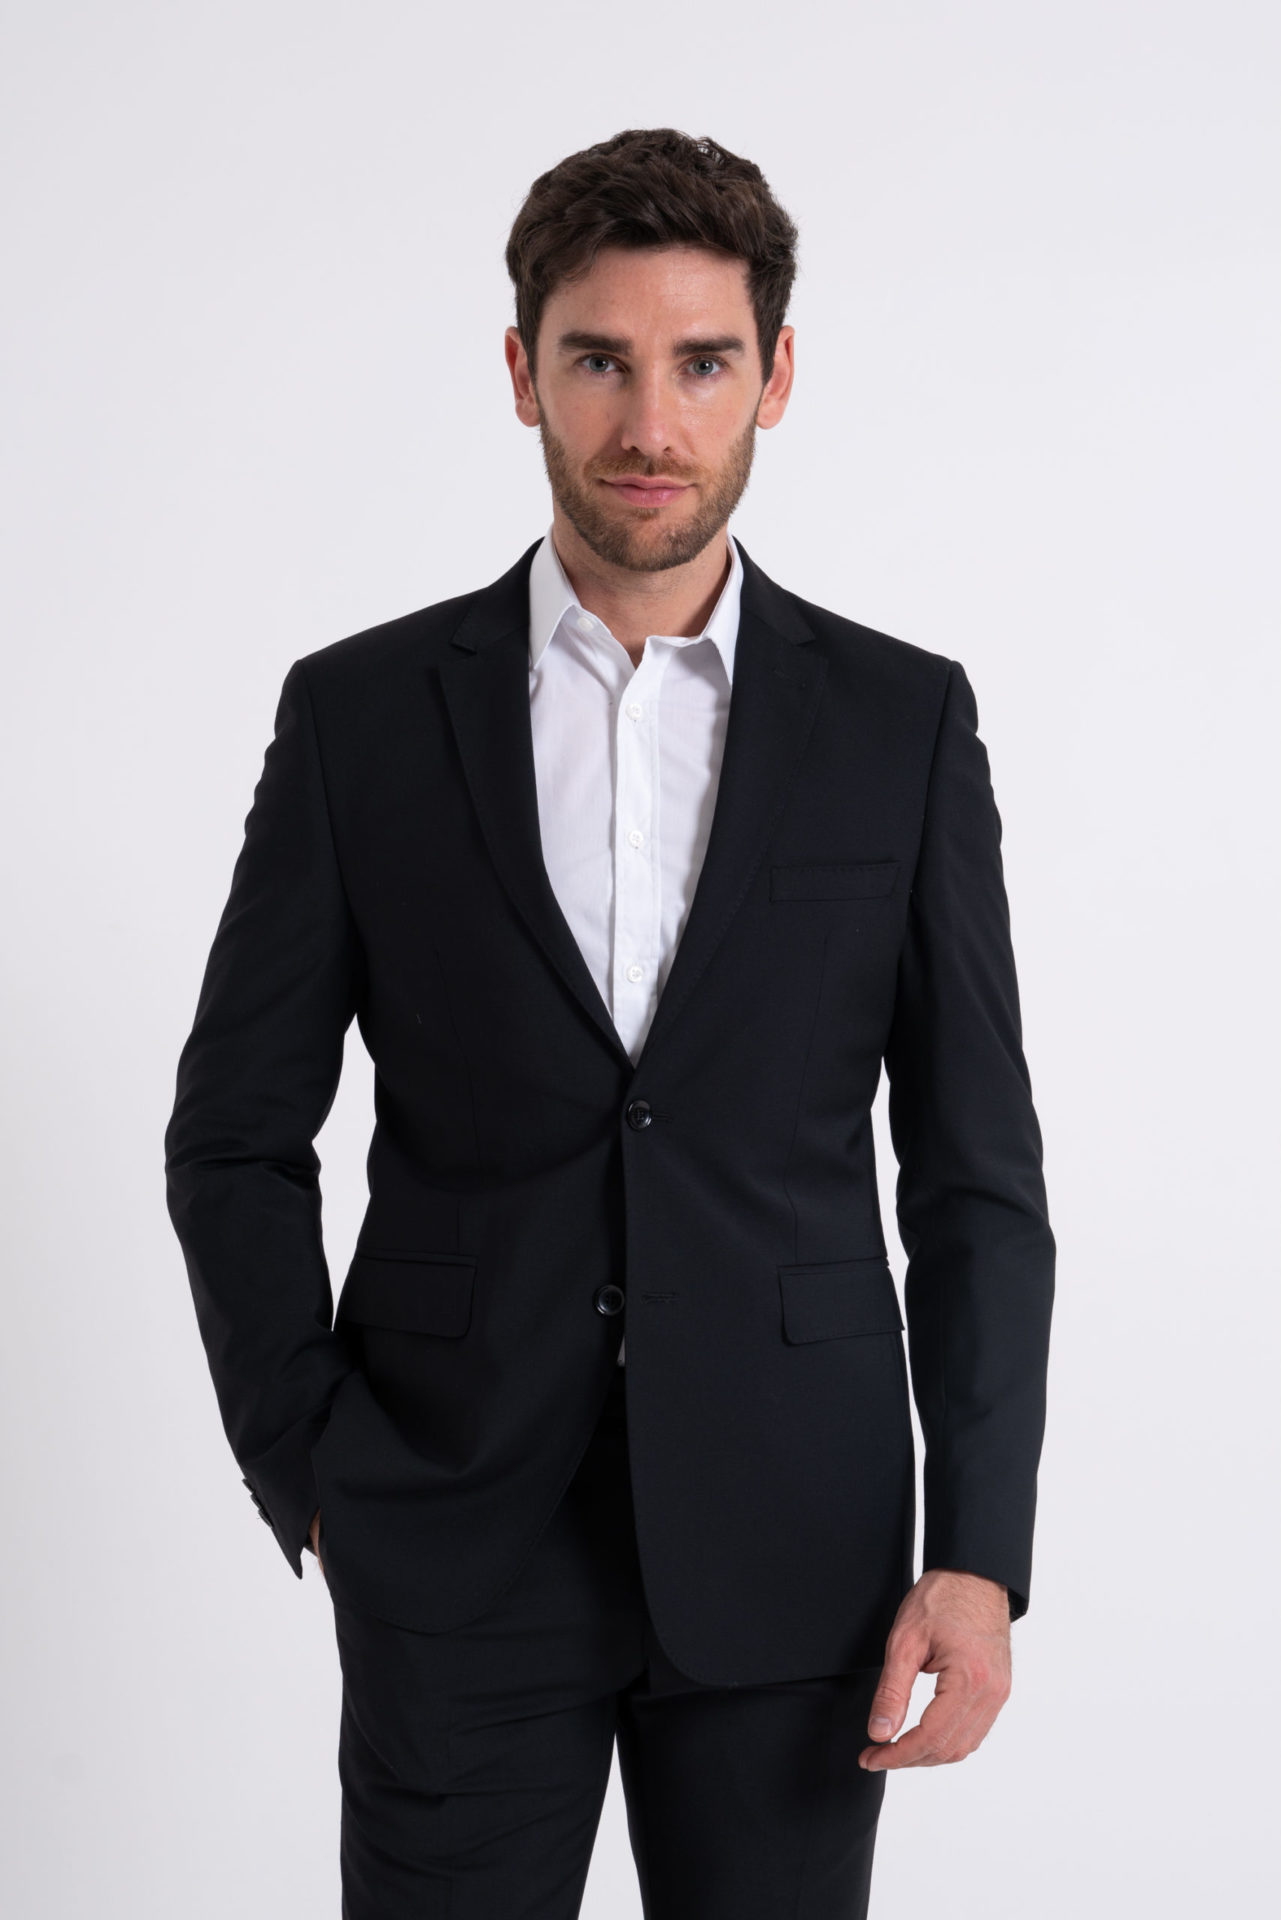 Mens Suit jacket for yacht crew